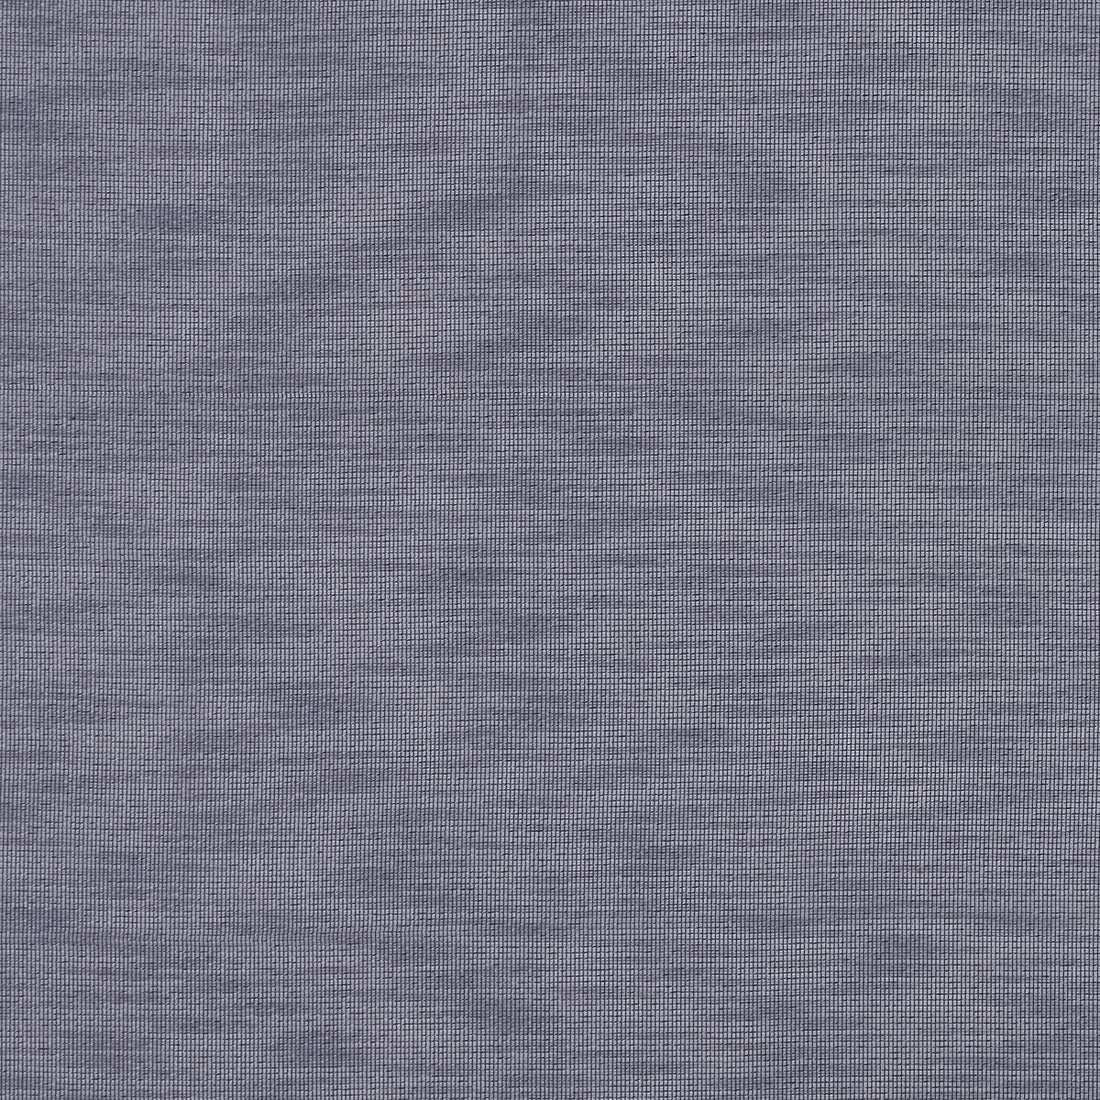 Maddox fabric in denim color - pattern F1282/05.CAC.0 - by Clarke And Clarke in the Clarke &amp; Clarke Metalli collection